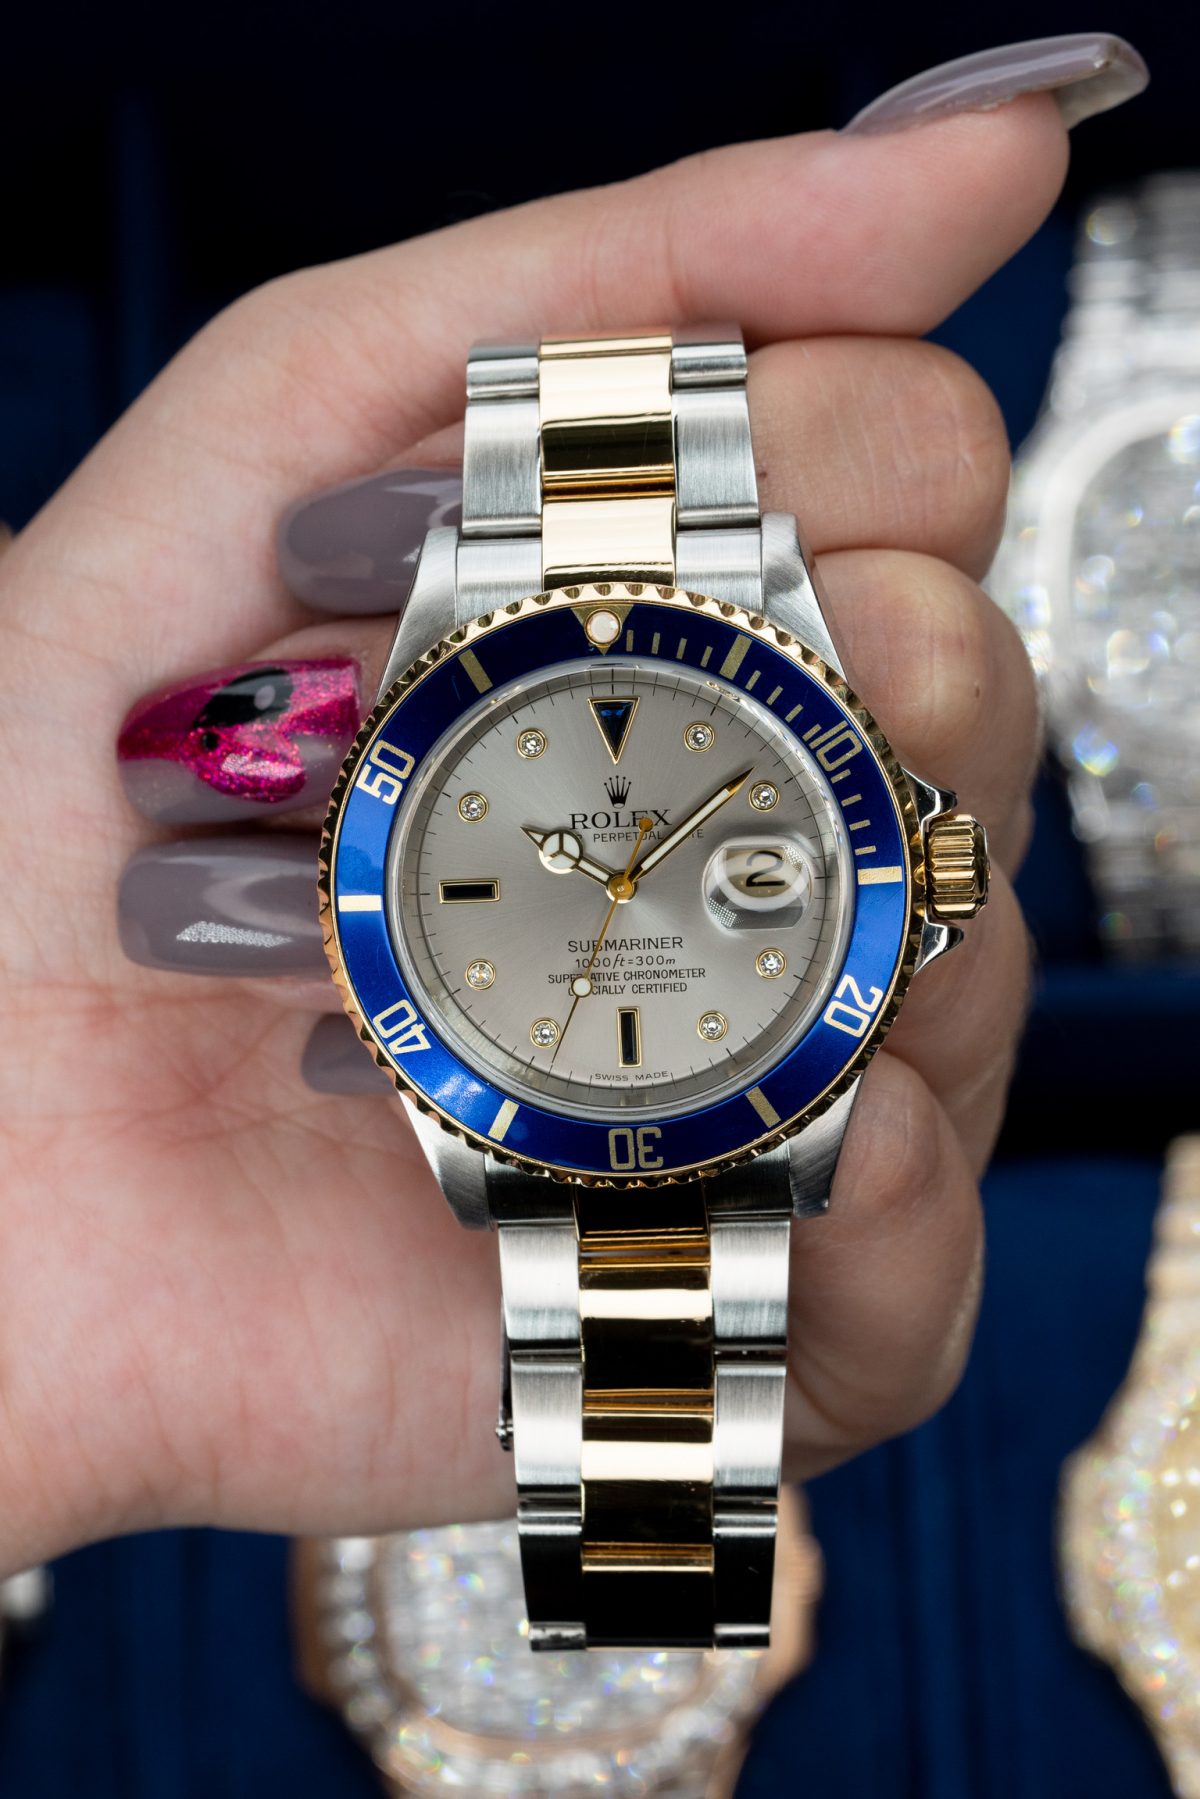 What is special about the Rolex Submariner Watch?